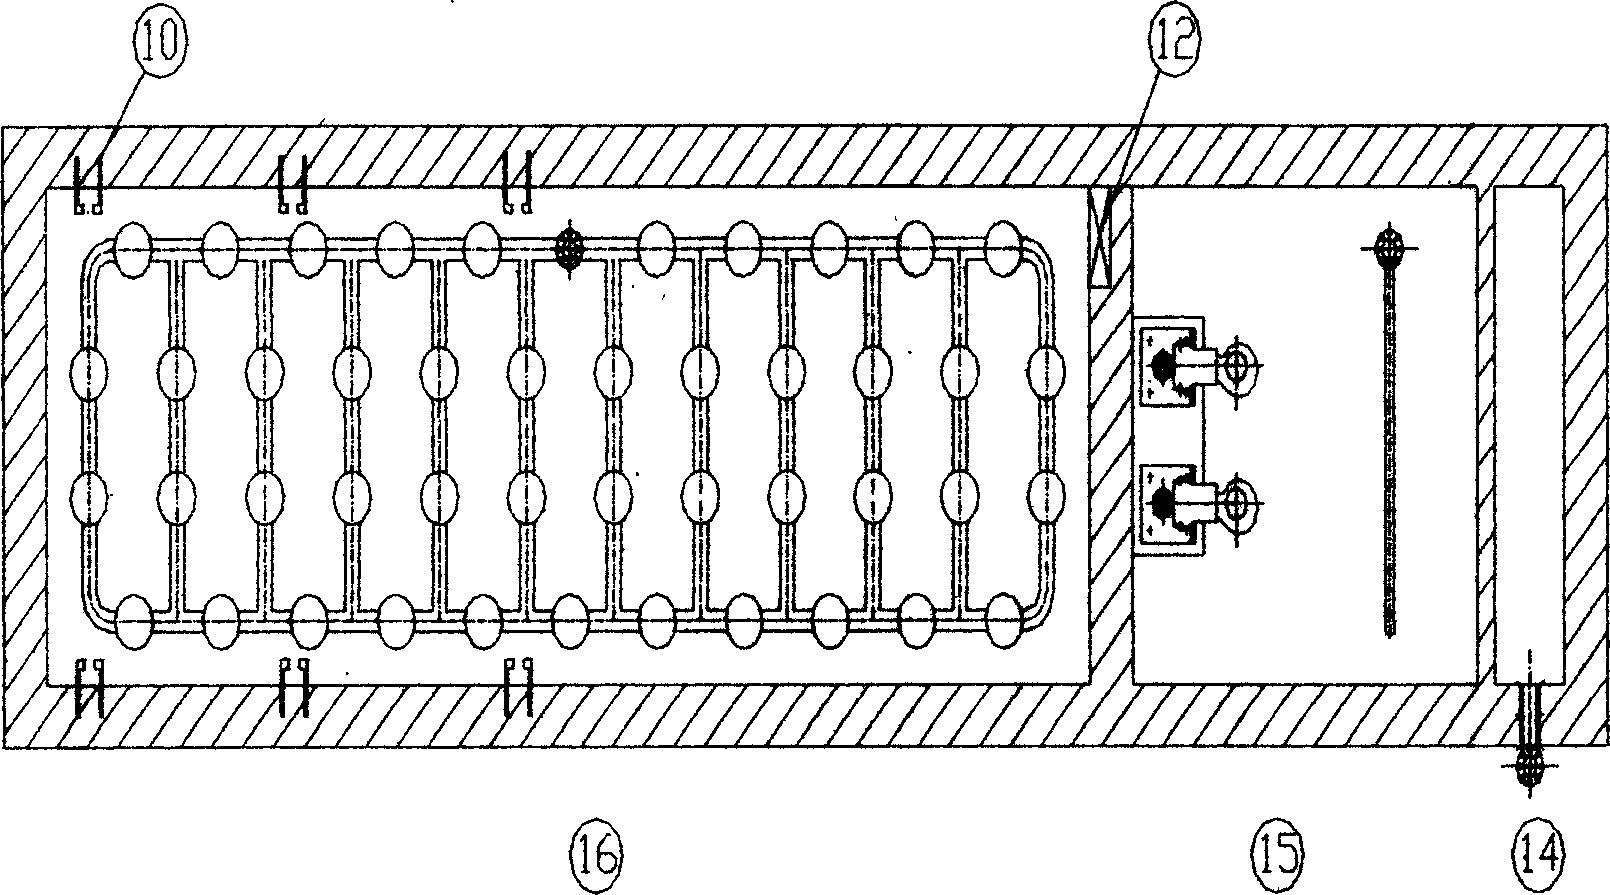 Integrated middle-water reuse apparatus